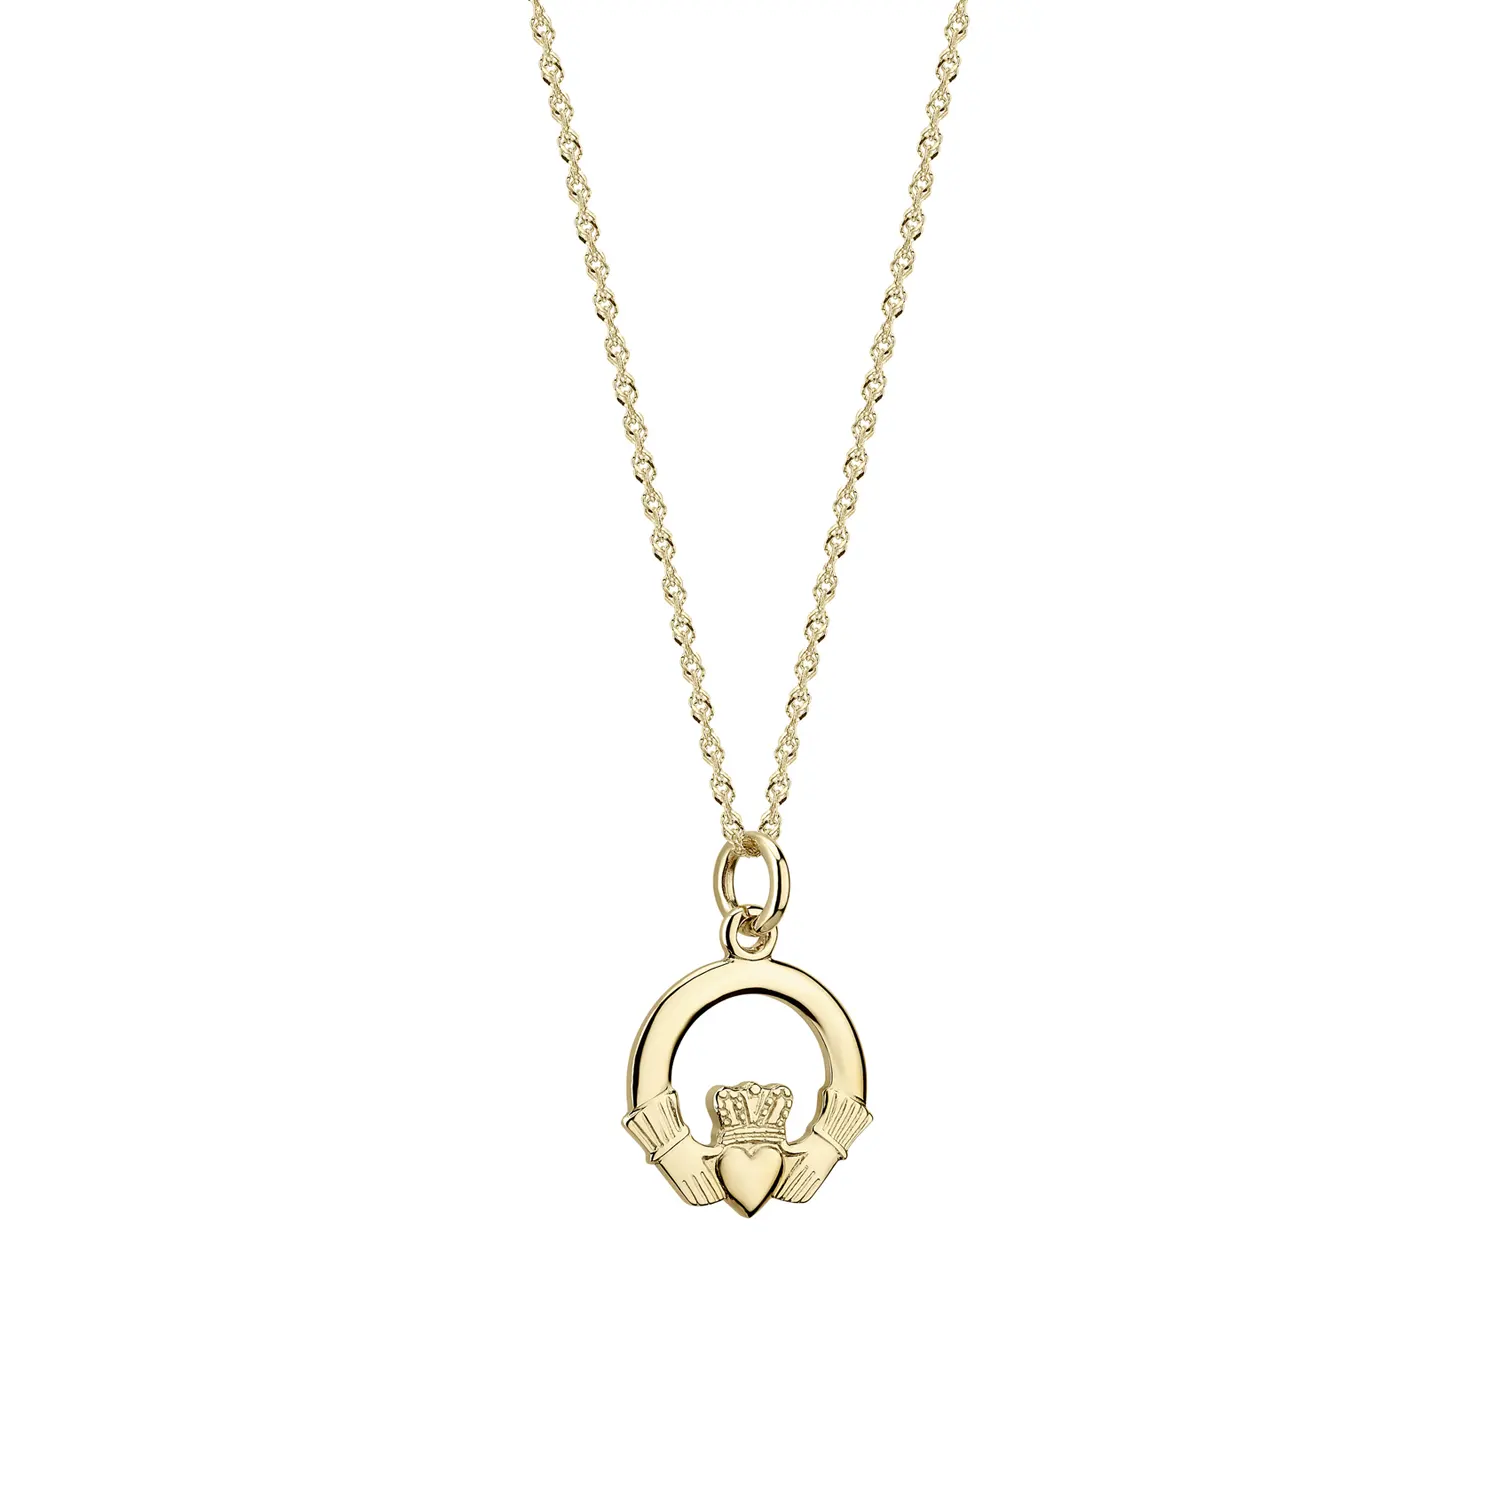 14ct. Yellow Gold Claddagh Necklace